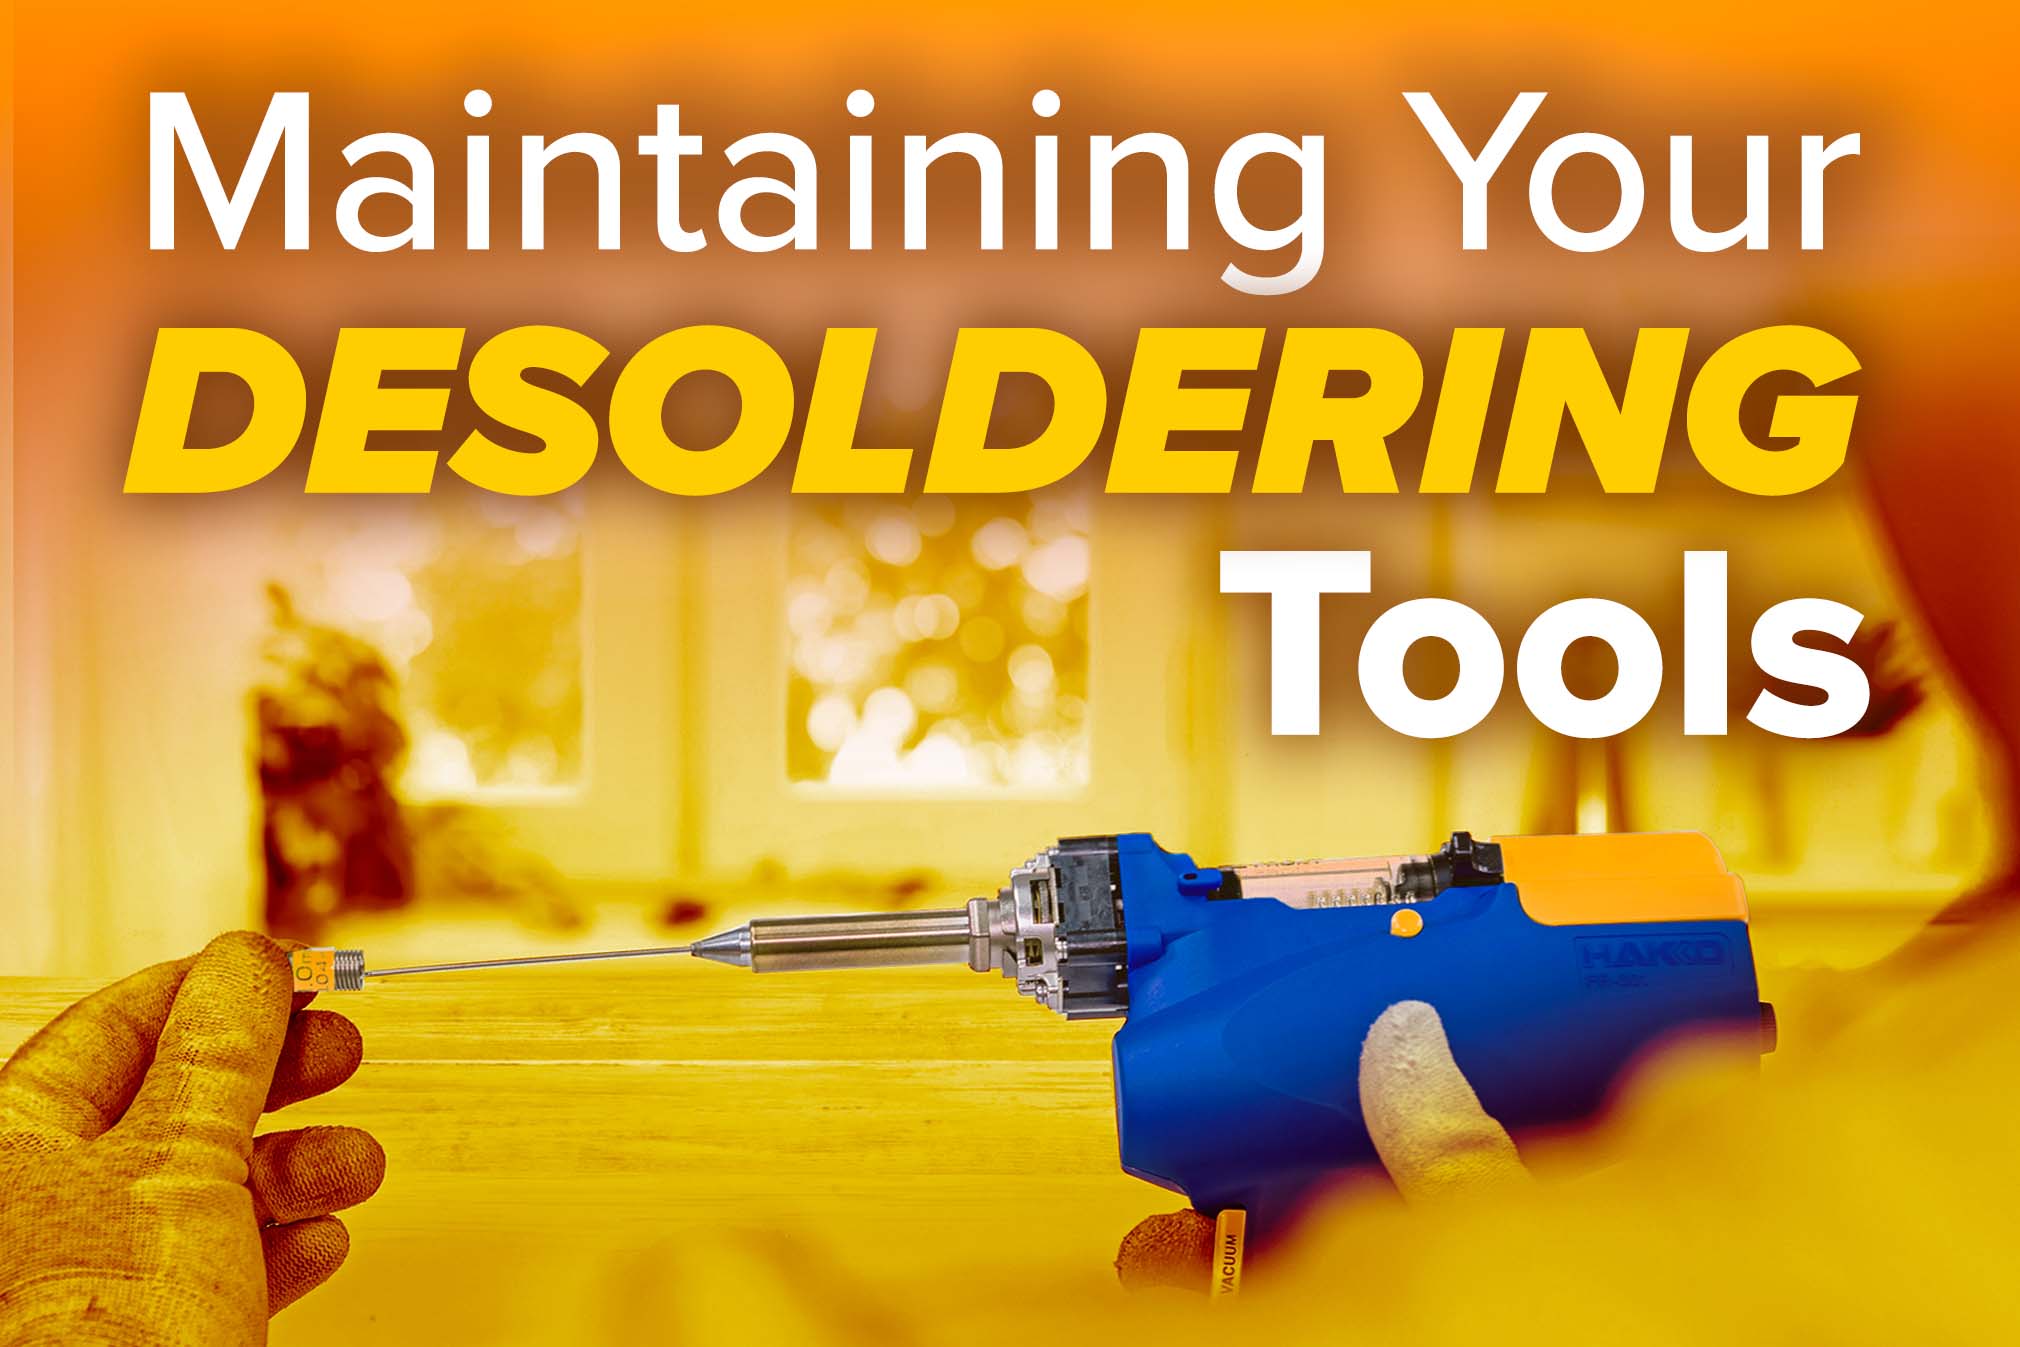 Maintaining Your Desoldering Tools